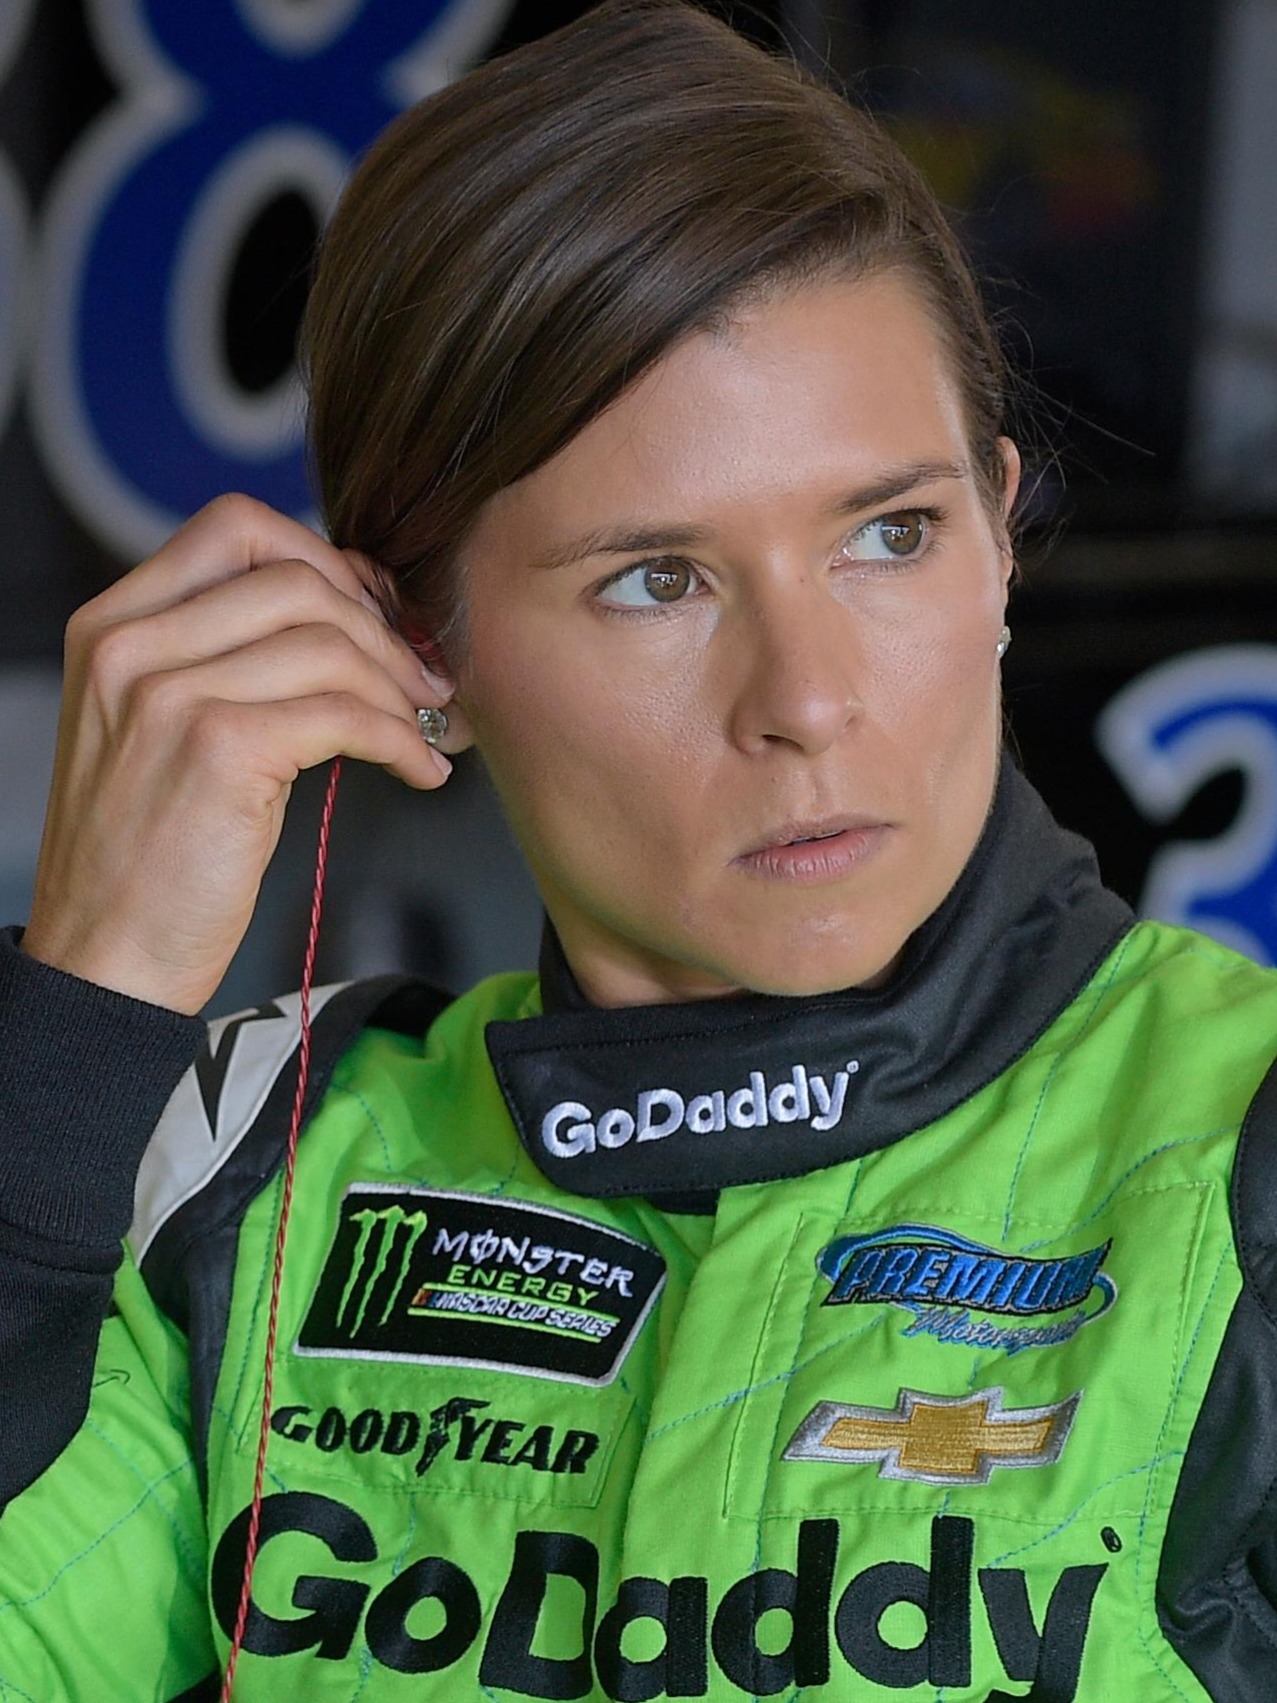 Which sponsor was prominently featured on Danica Patrick's race cars throughout her career?